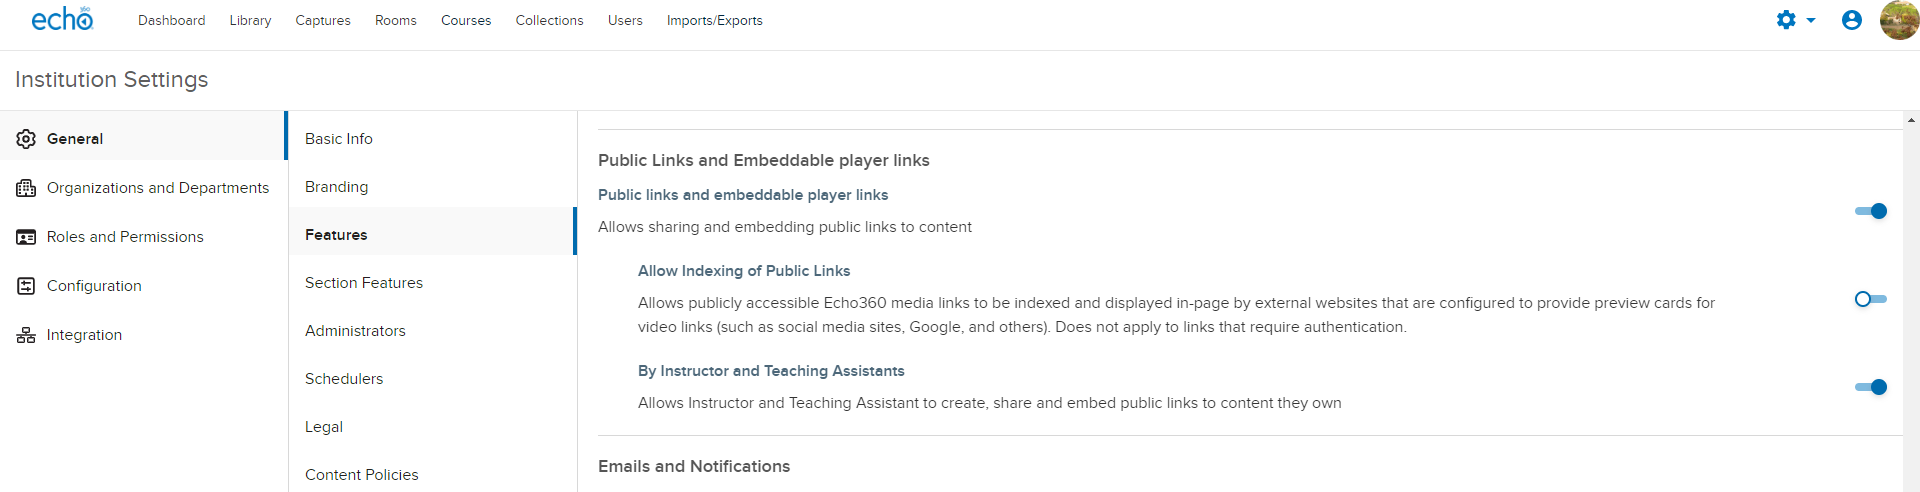 Institution feature toggles for controlling public links to media for steps as described